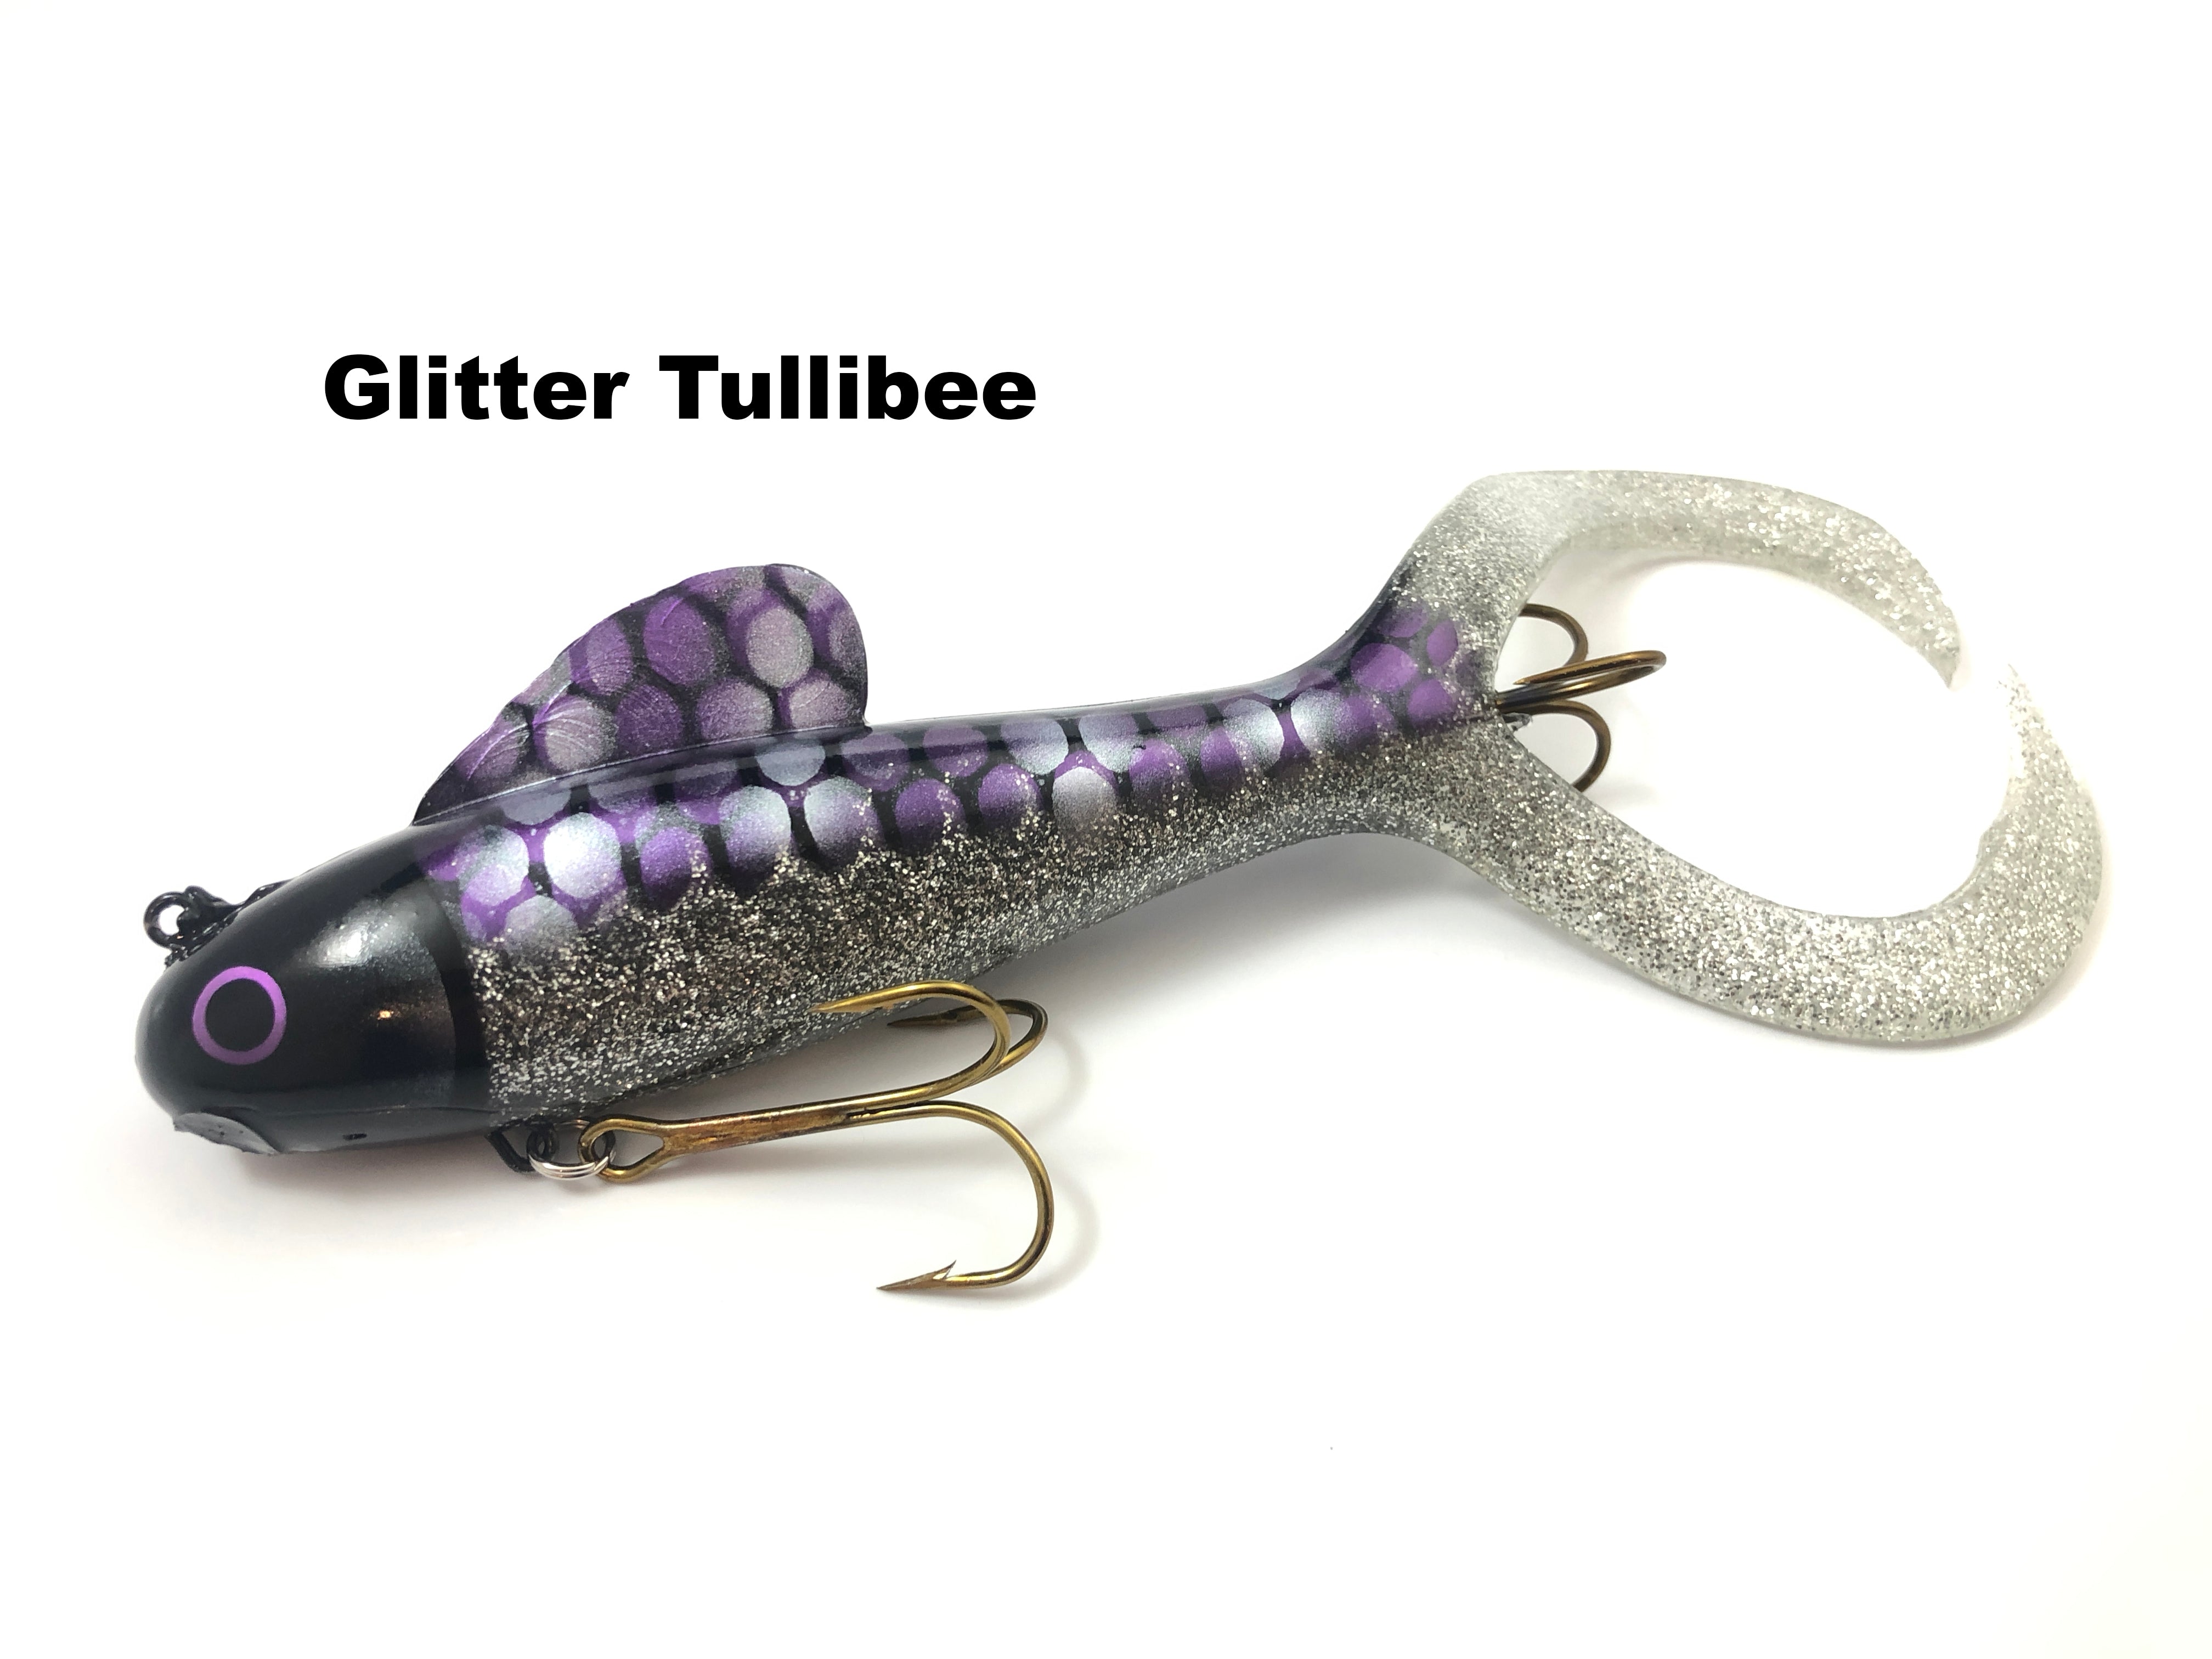 New Musky Lure ::: The Boba Fatt , wooden muskie lures 